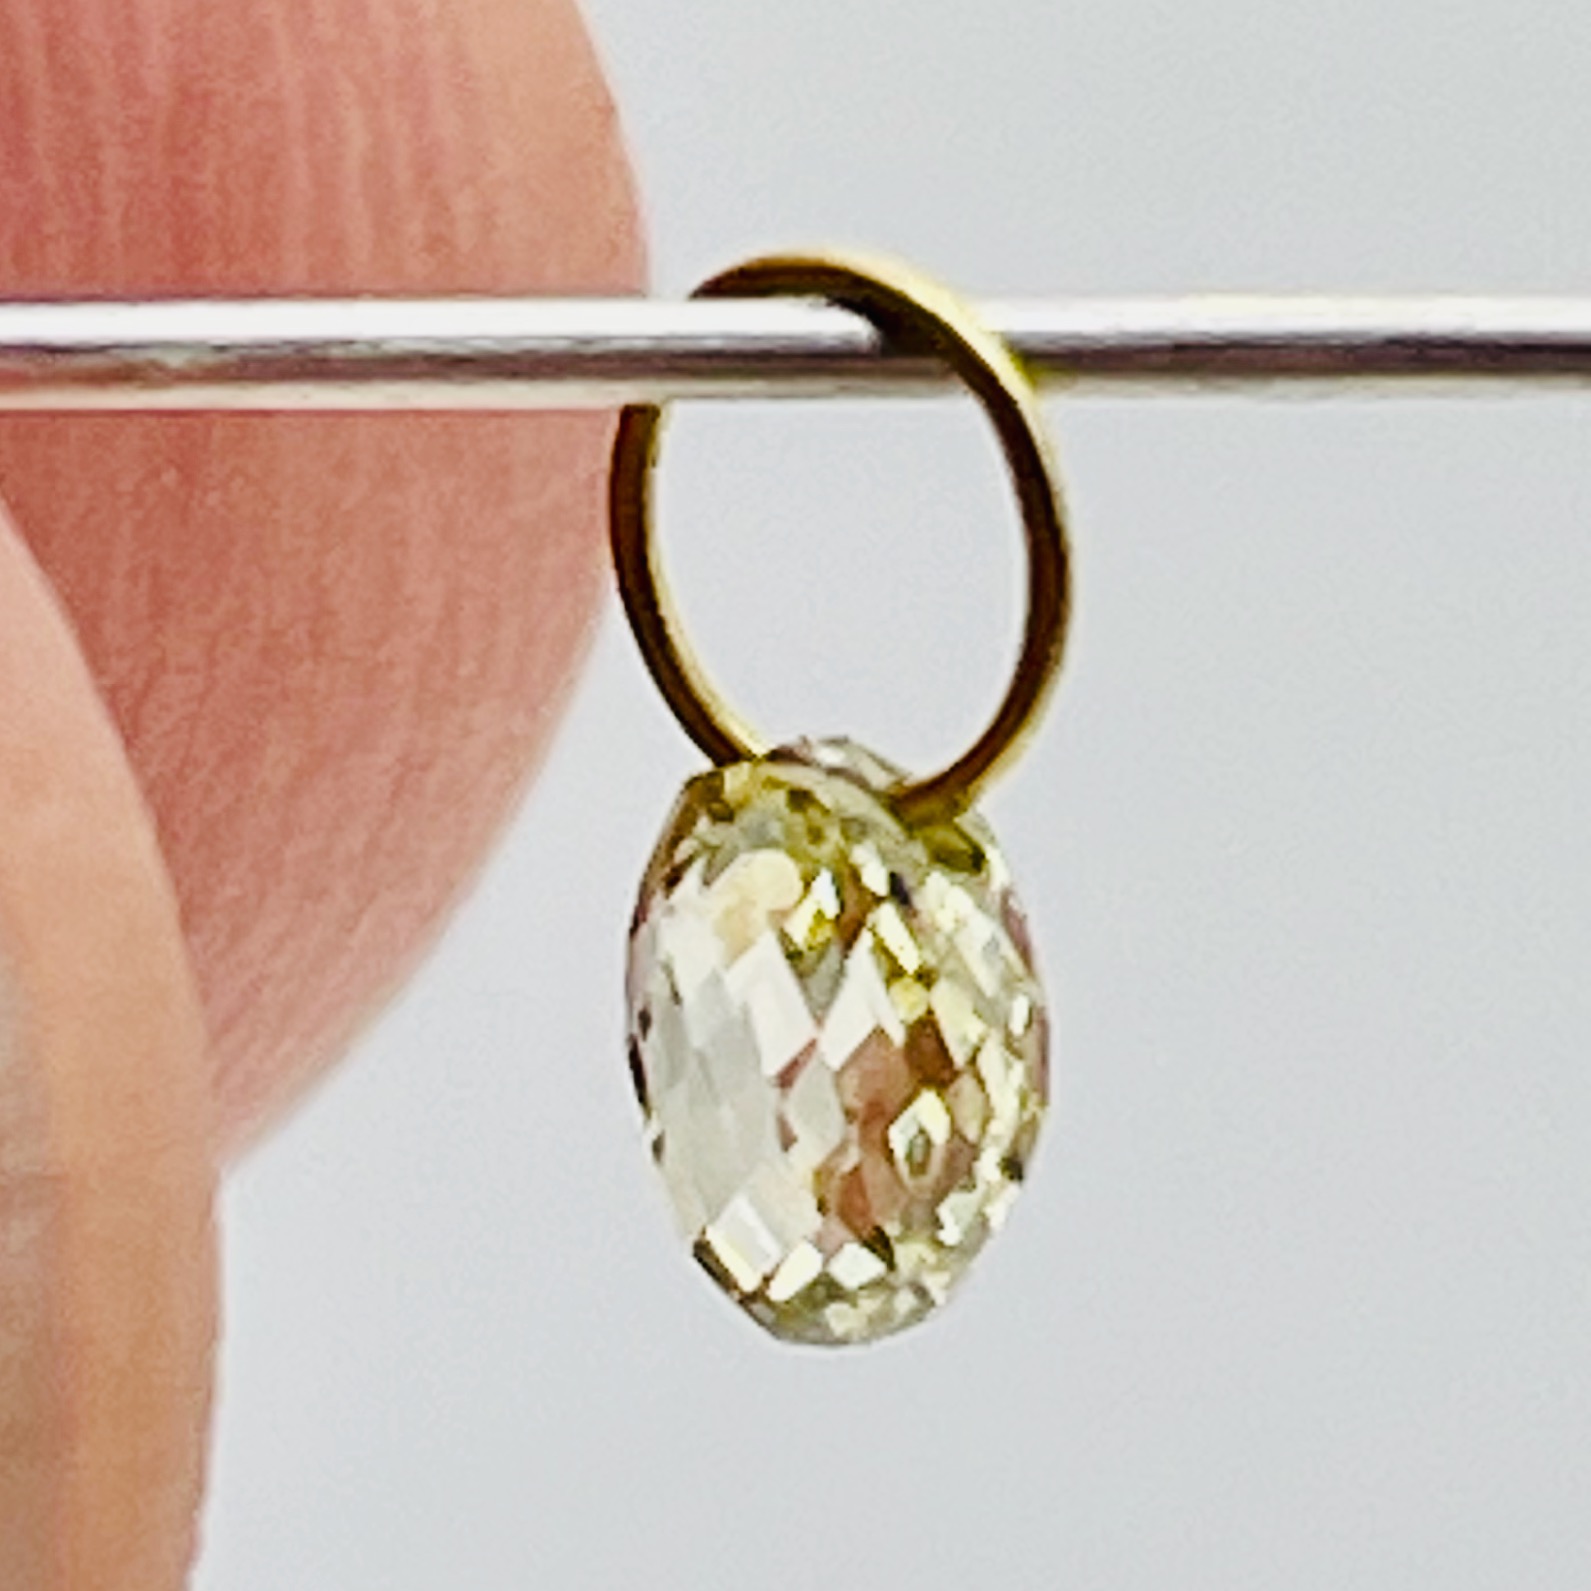 0.26cts Natural Canary Diamond & 18K Gold Pendant | 3.5x2.5x2mm | 1 Bead | - image 2 of 12